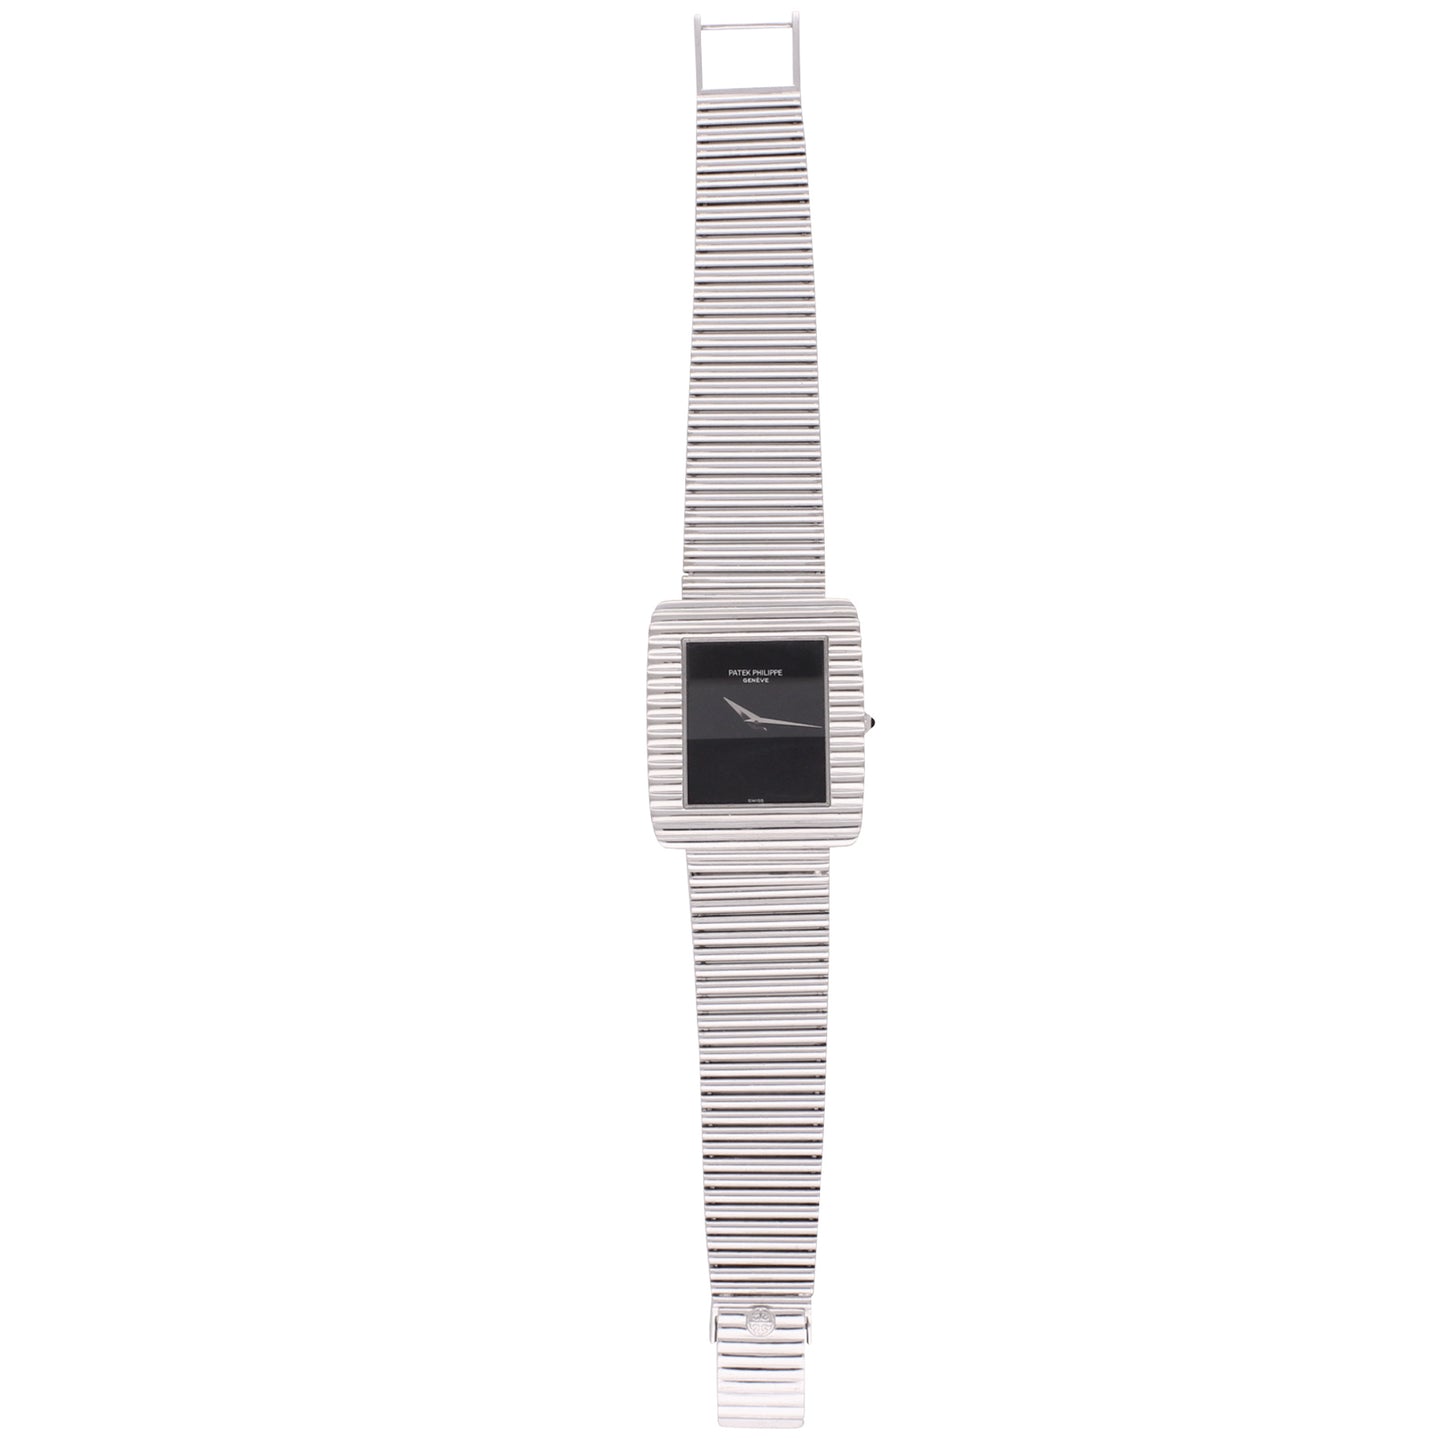 18ct white gold, reference 3633/1 "Gondolo" wristwatch. Made 1976